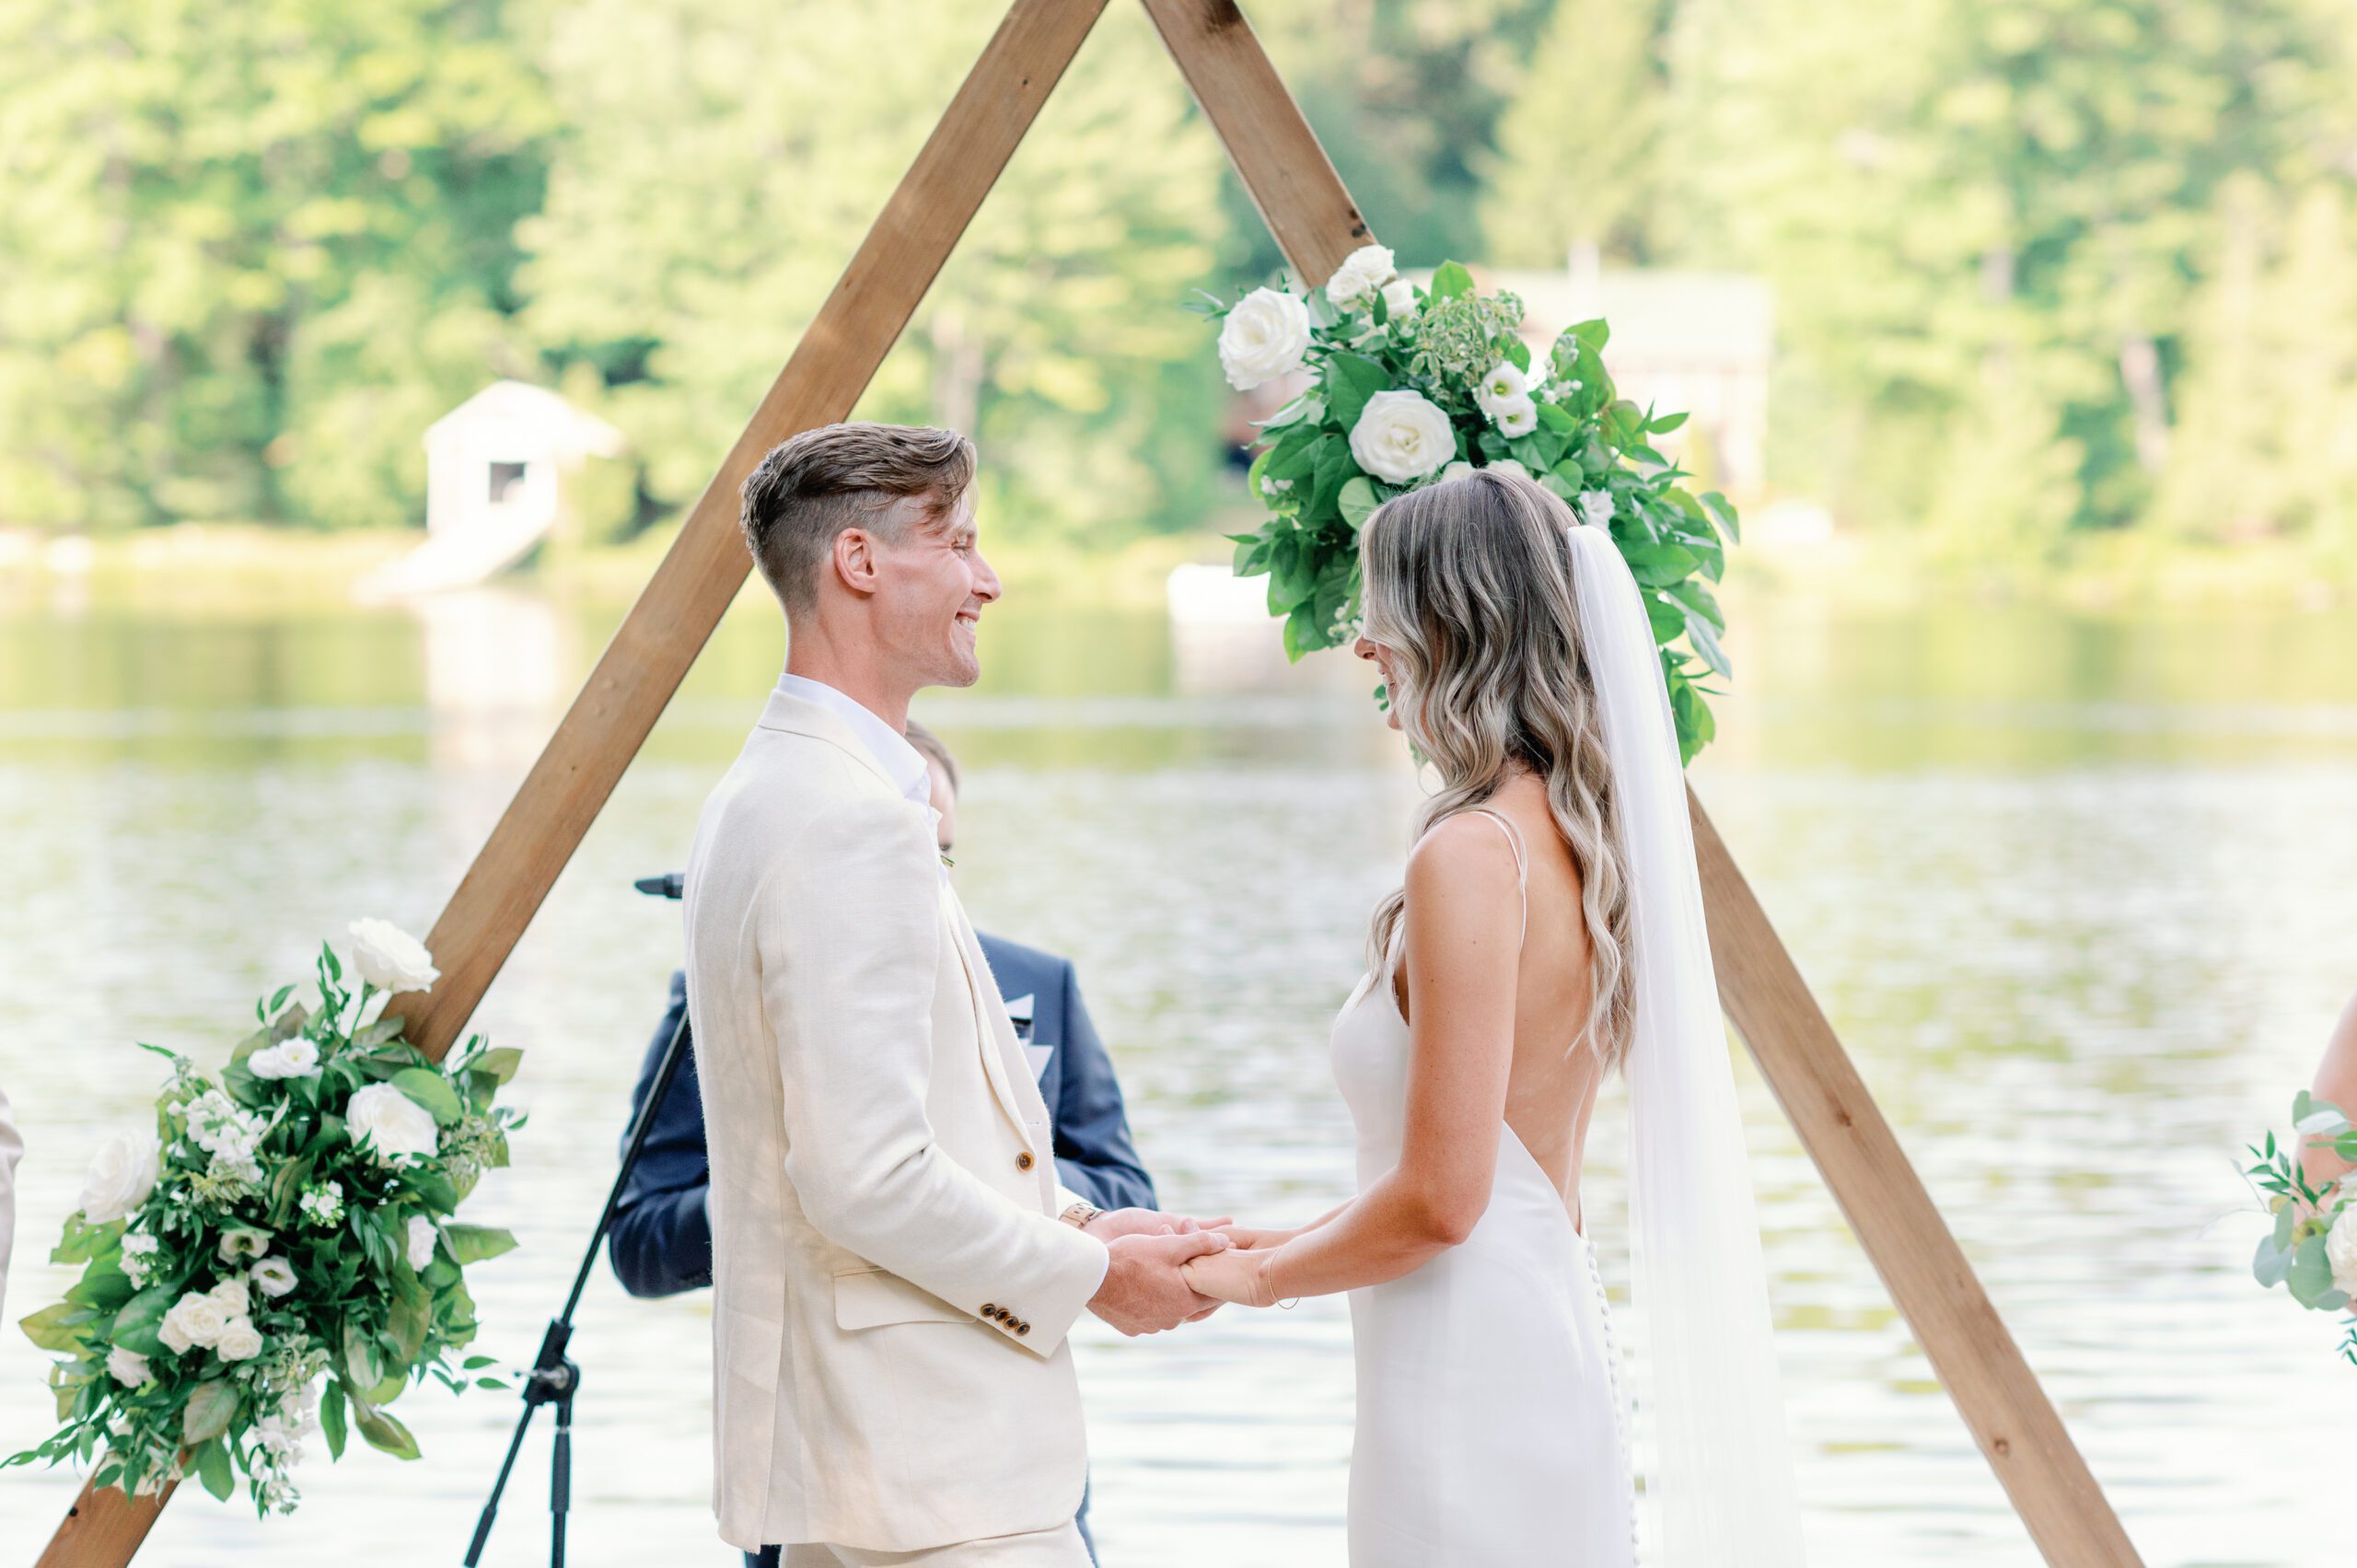 Couple getting married under wooden triangle at Muskoka Lake wedding.